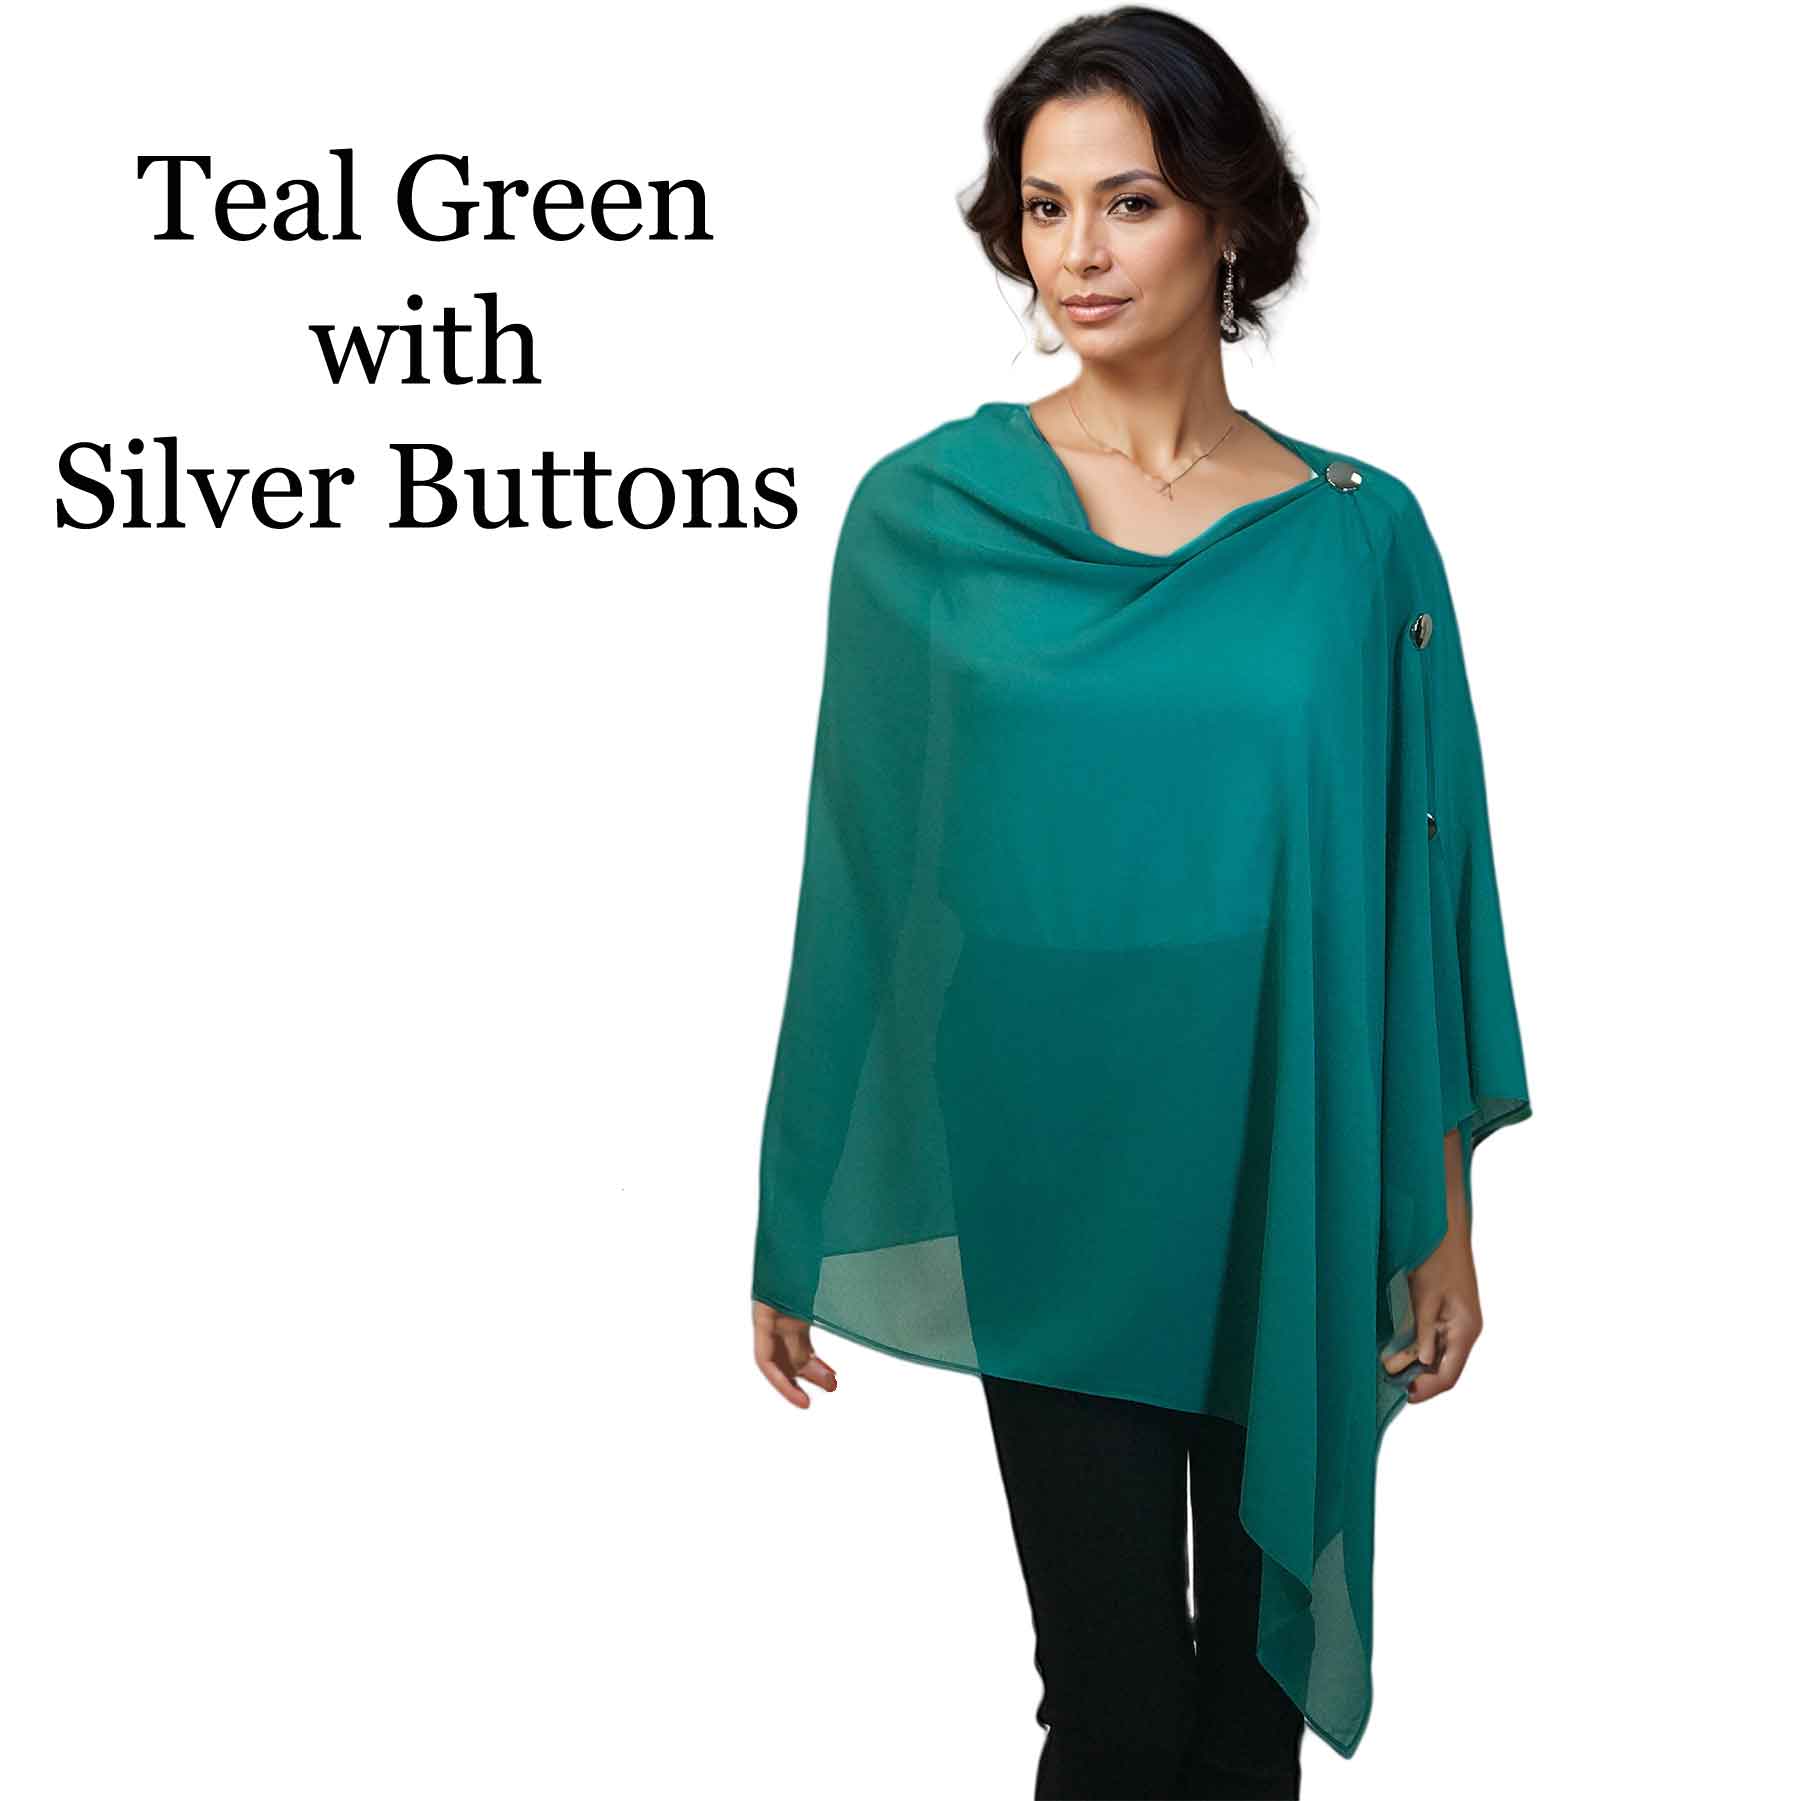 003S - Teal Green w/Silver Buttons<br>
Georgette Button Shawl

